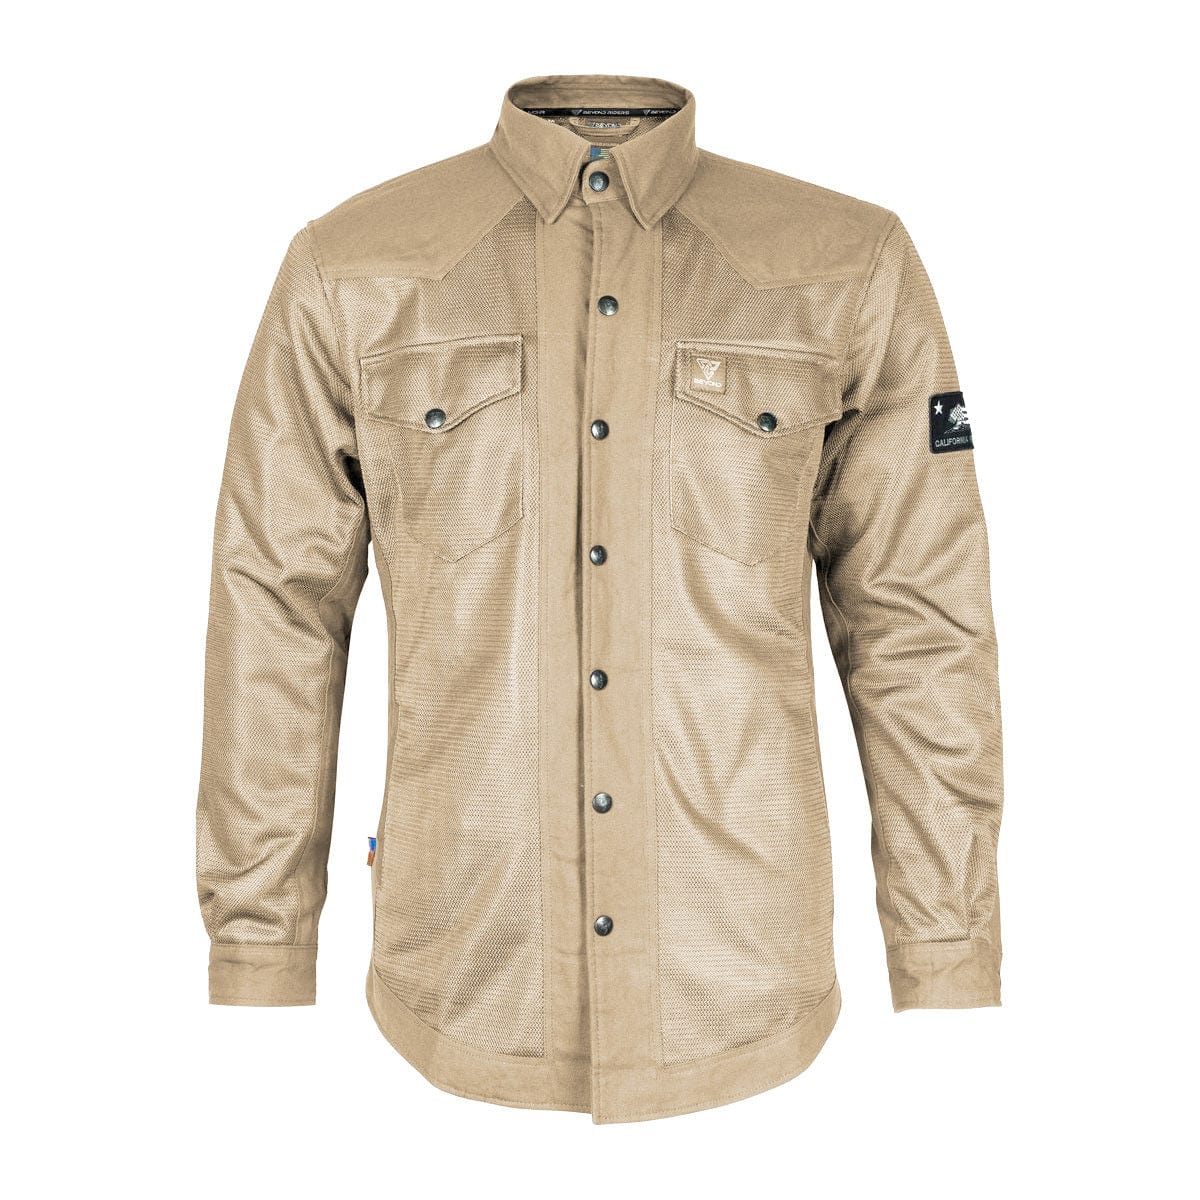 Protective Summer Mesh Shirt - Khaki Solid with Pads